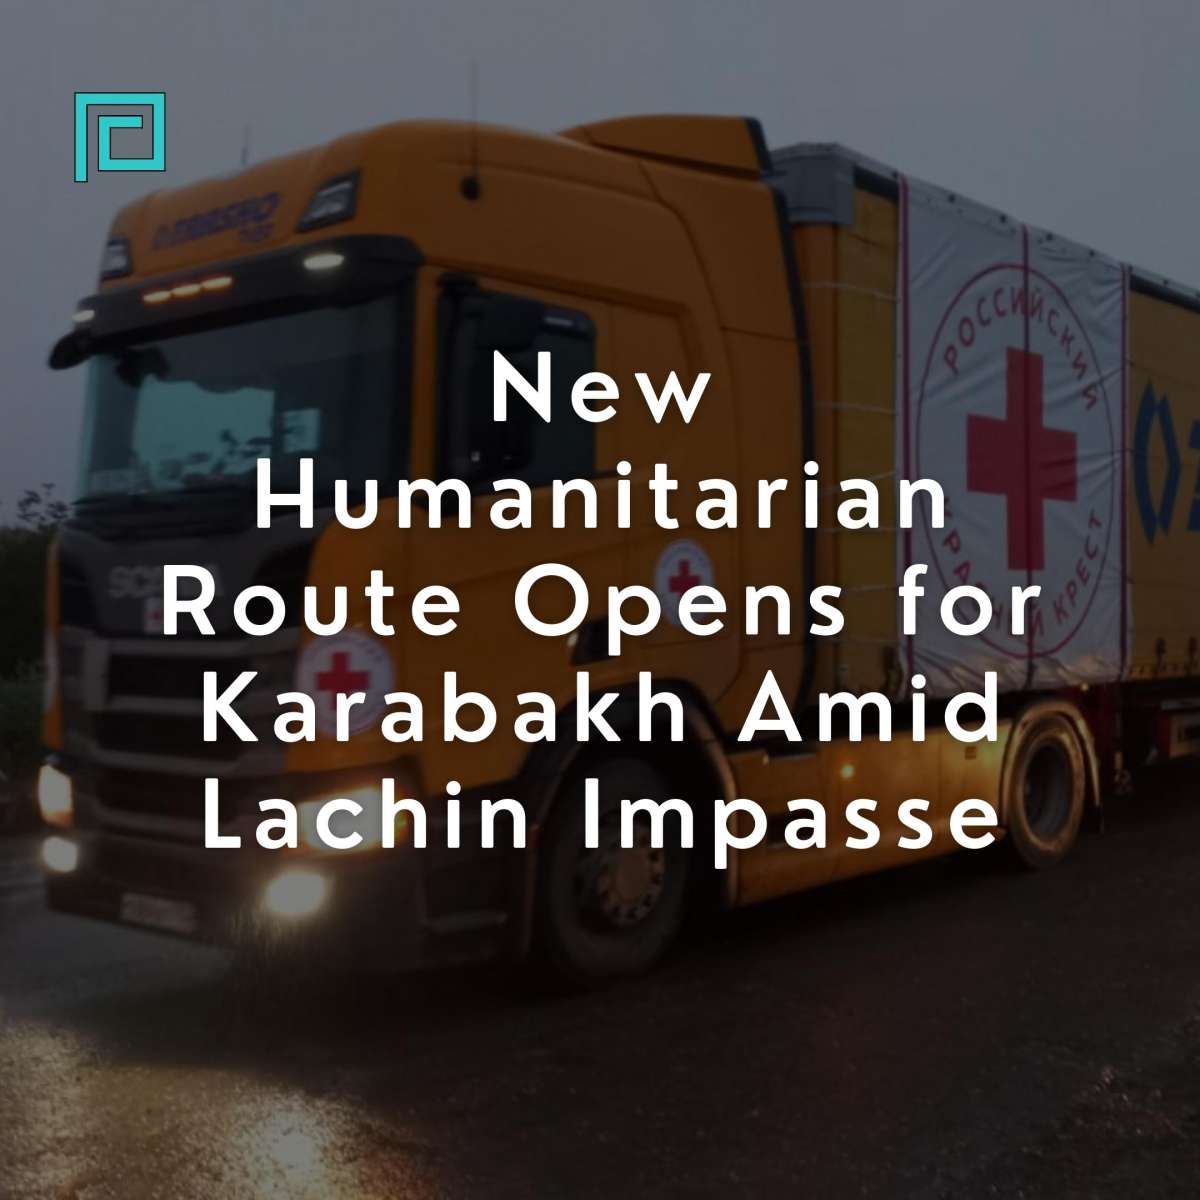 New Humanitarian Route Opens for Karabakh Amid Lachin Impasse